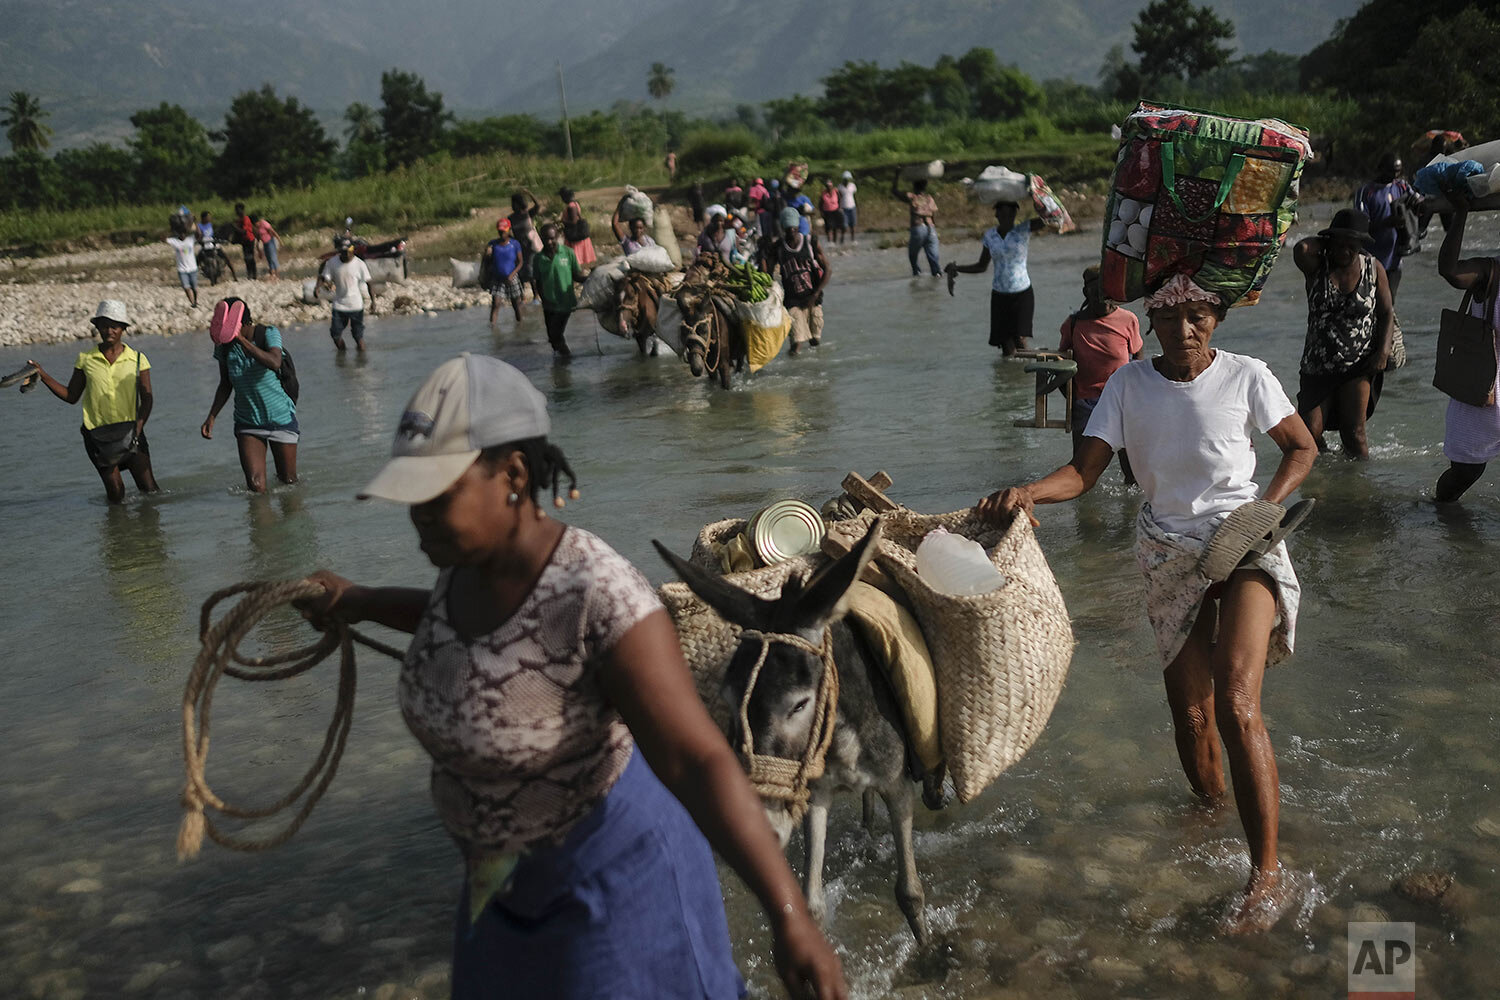  Residents cross the Cavaillon River to reach the Maniche market to sell their products, in Maniche, Haiti, Aug. 24, 2021, a week after a 7.2 magnitude earthquake. (AP Photo/Matias Delacroix) 